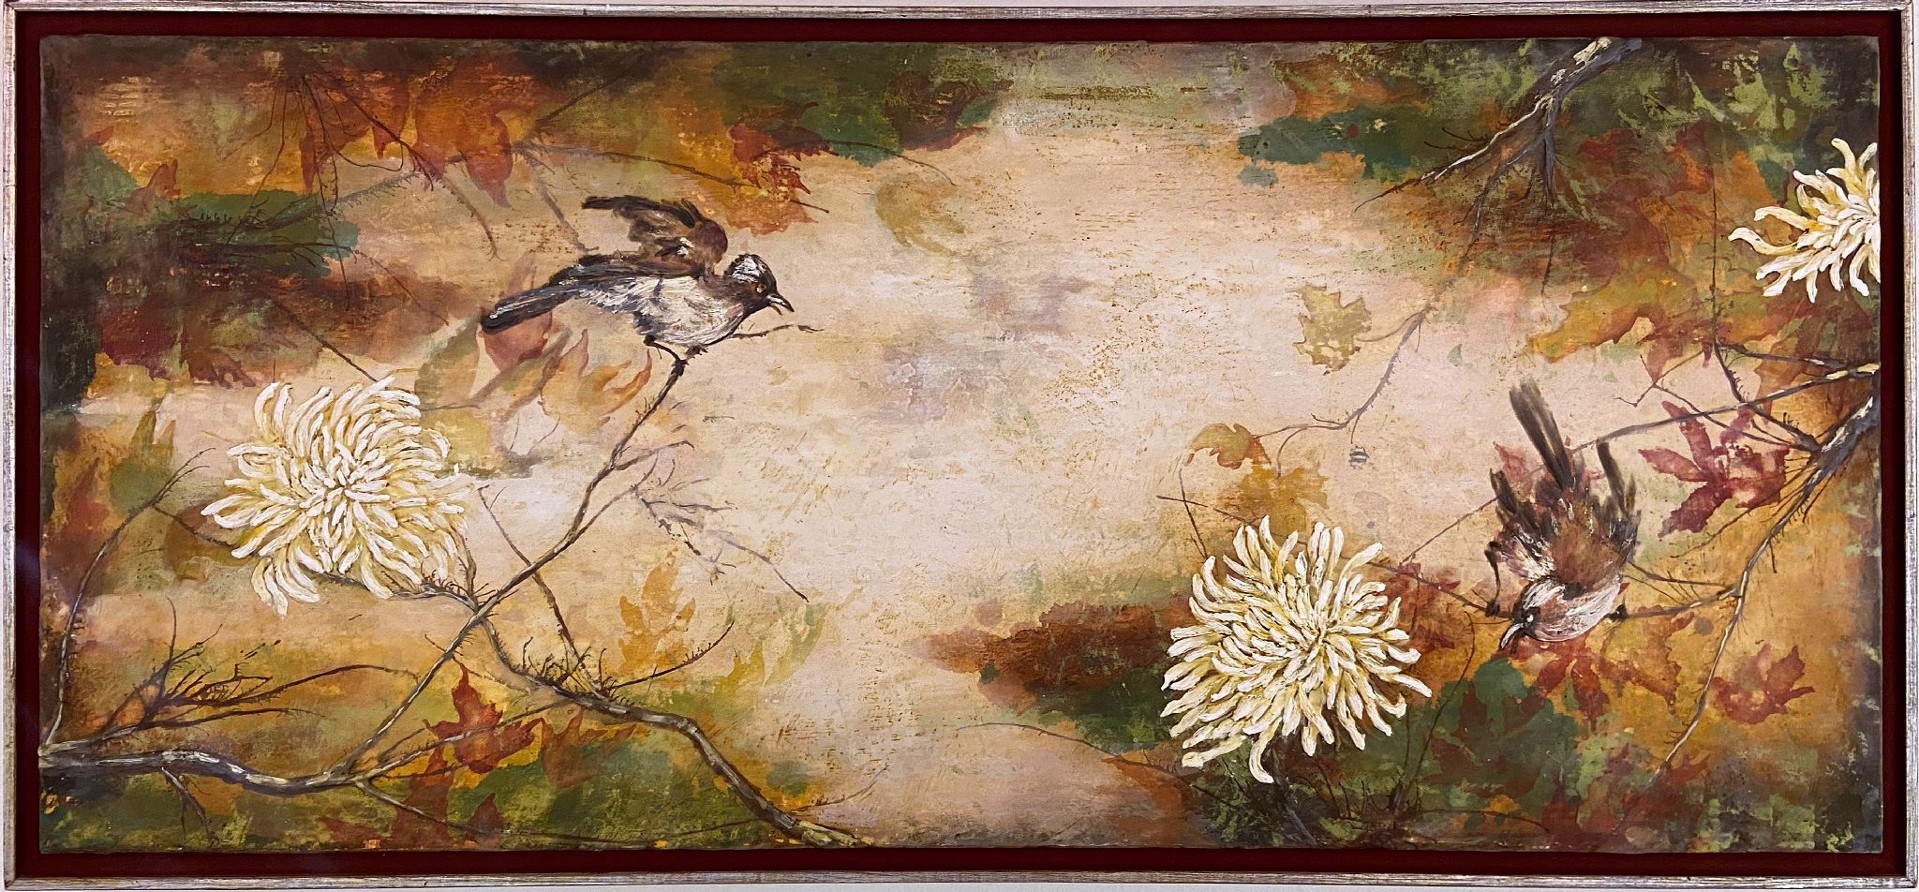 Perching Birds With Chrysanthemums by Michelle Haglund